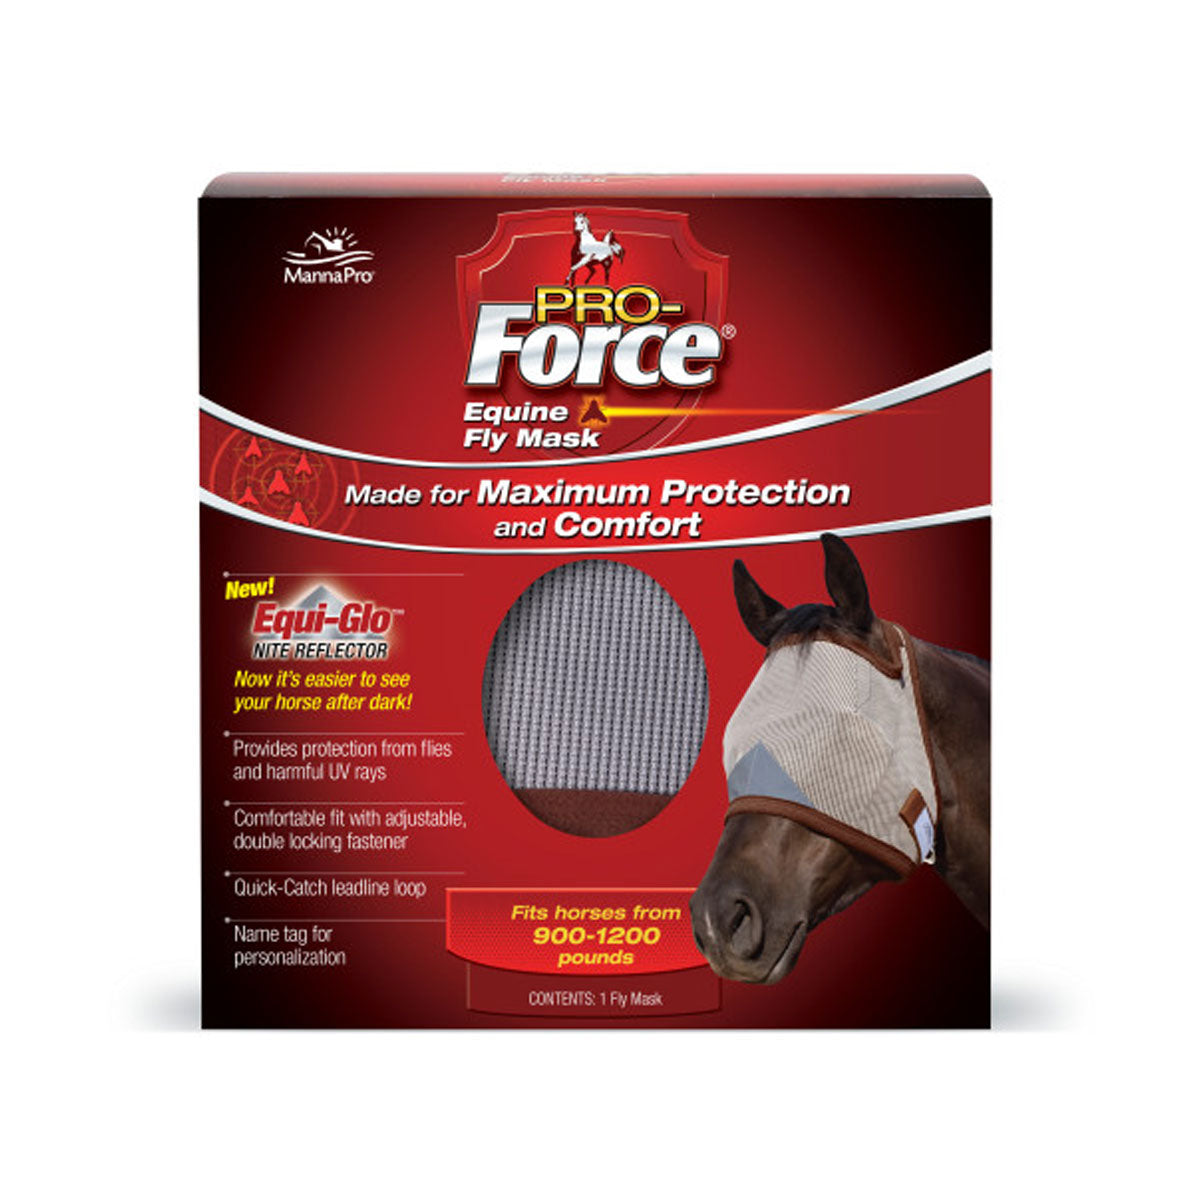 Masque anti-mouches standard Manna Pro Force